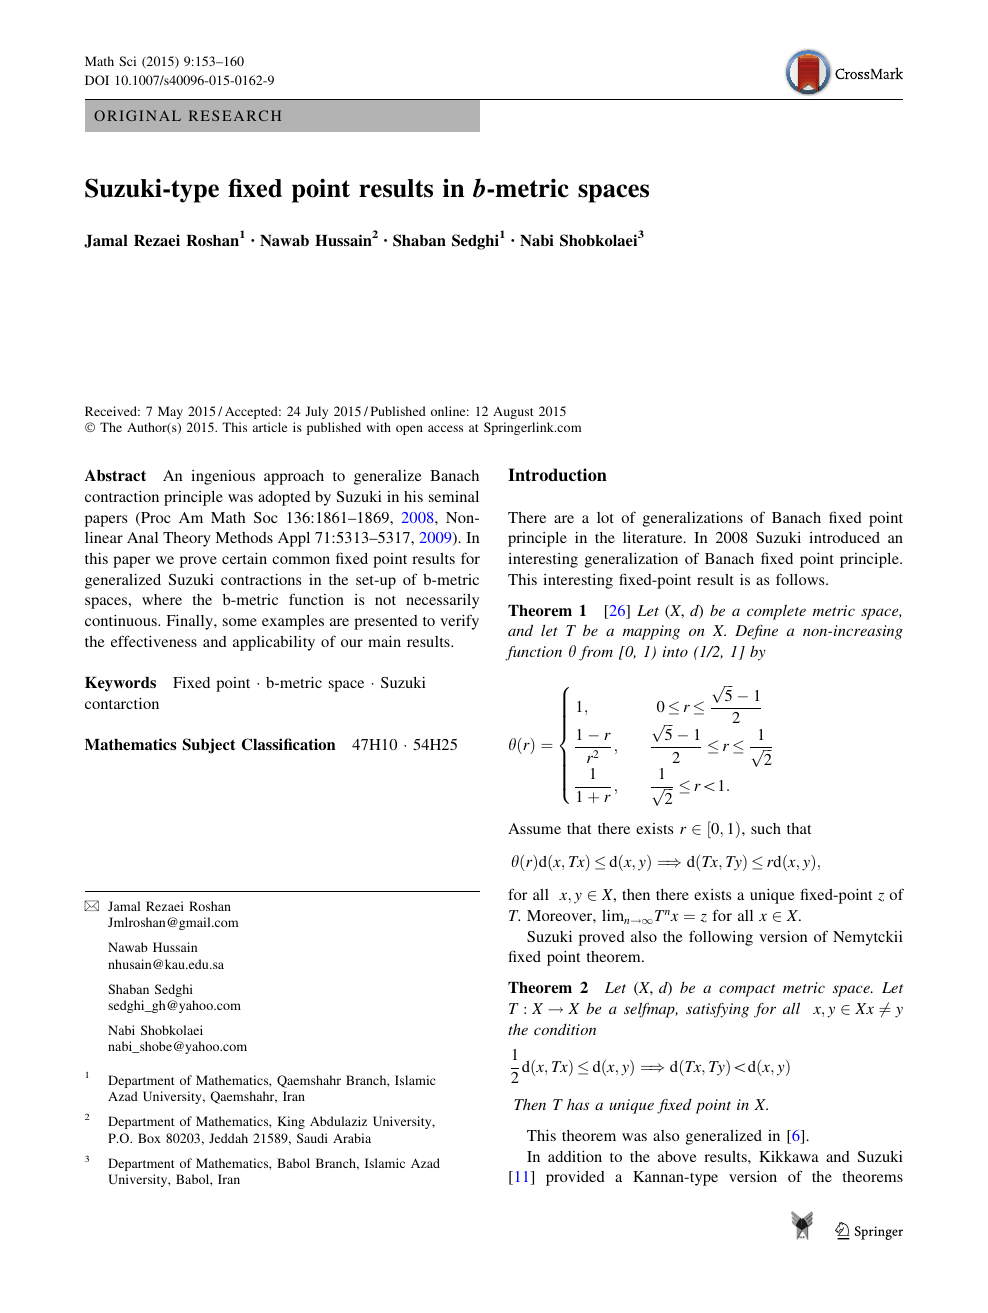 Suzuki Type Fixed Point Results In B Metric Spaces Topic Of Research Paper In Mathematics Download Scholarly Article Pdf And Read For Free On Cyberleninka Open Science Hub